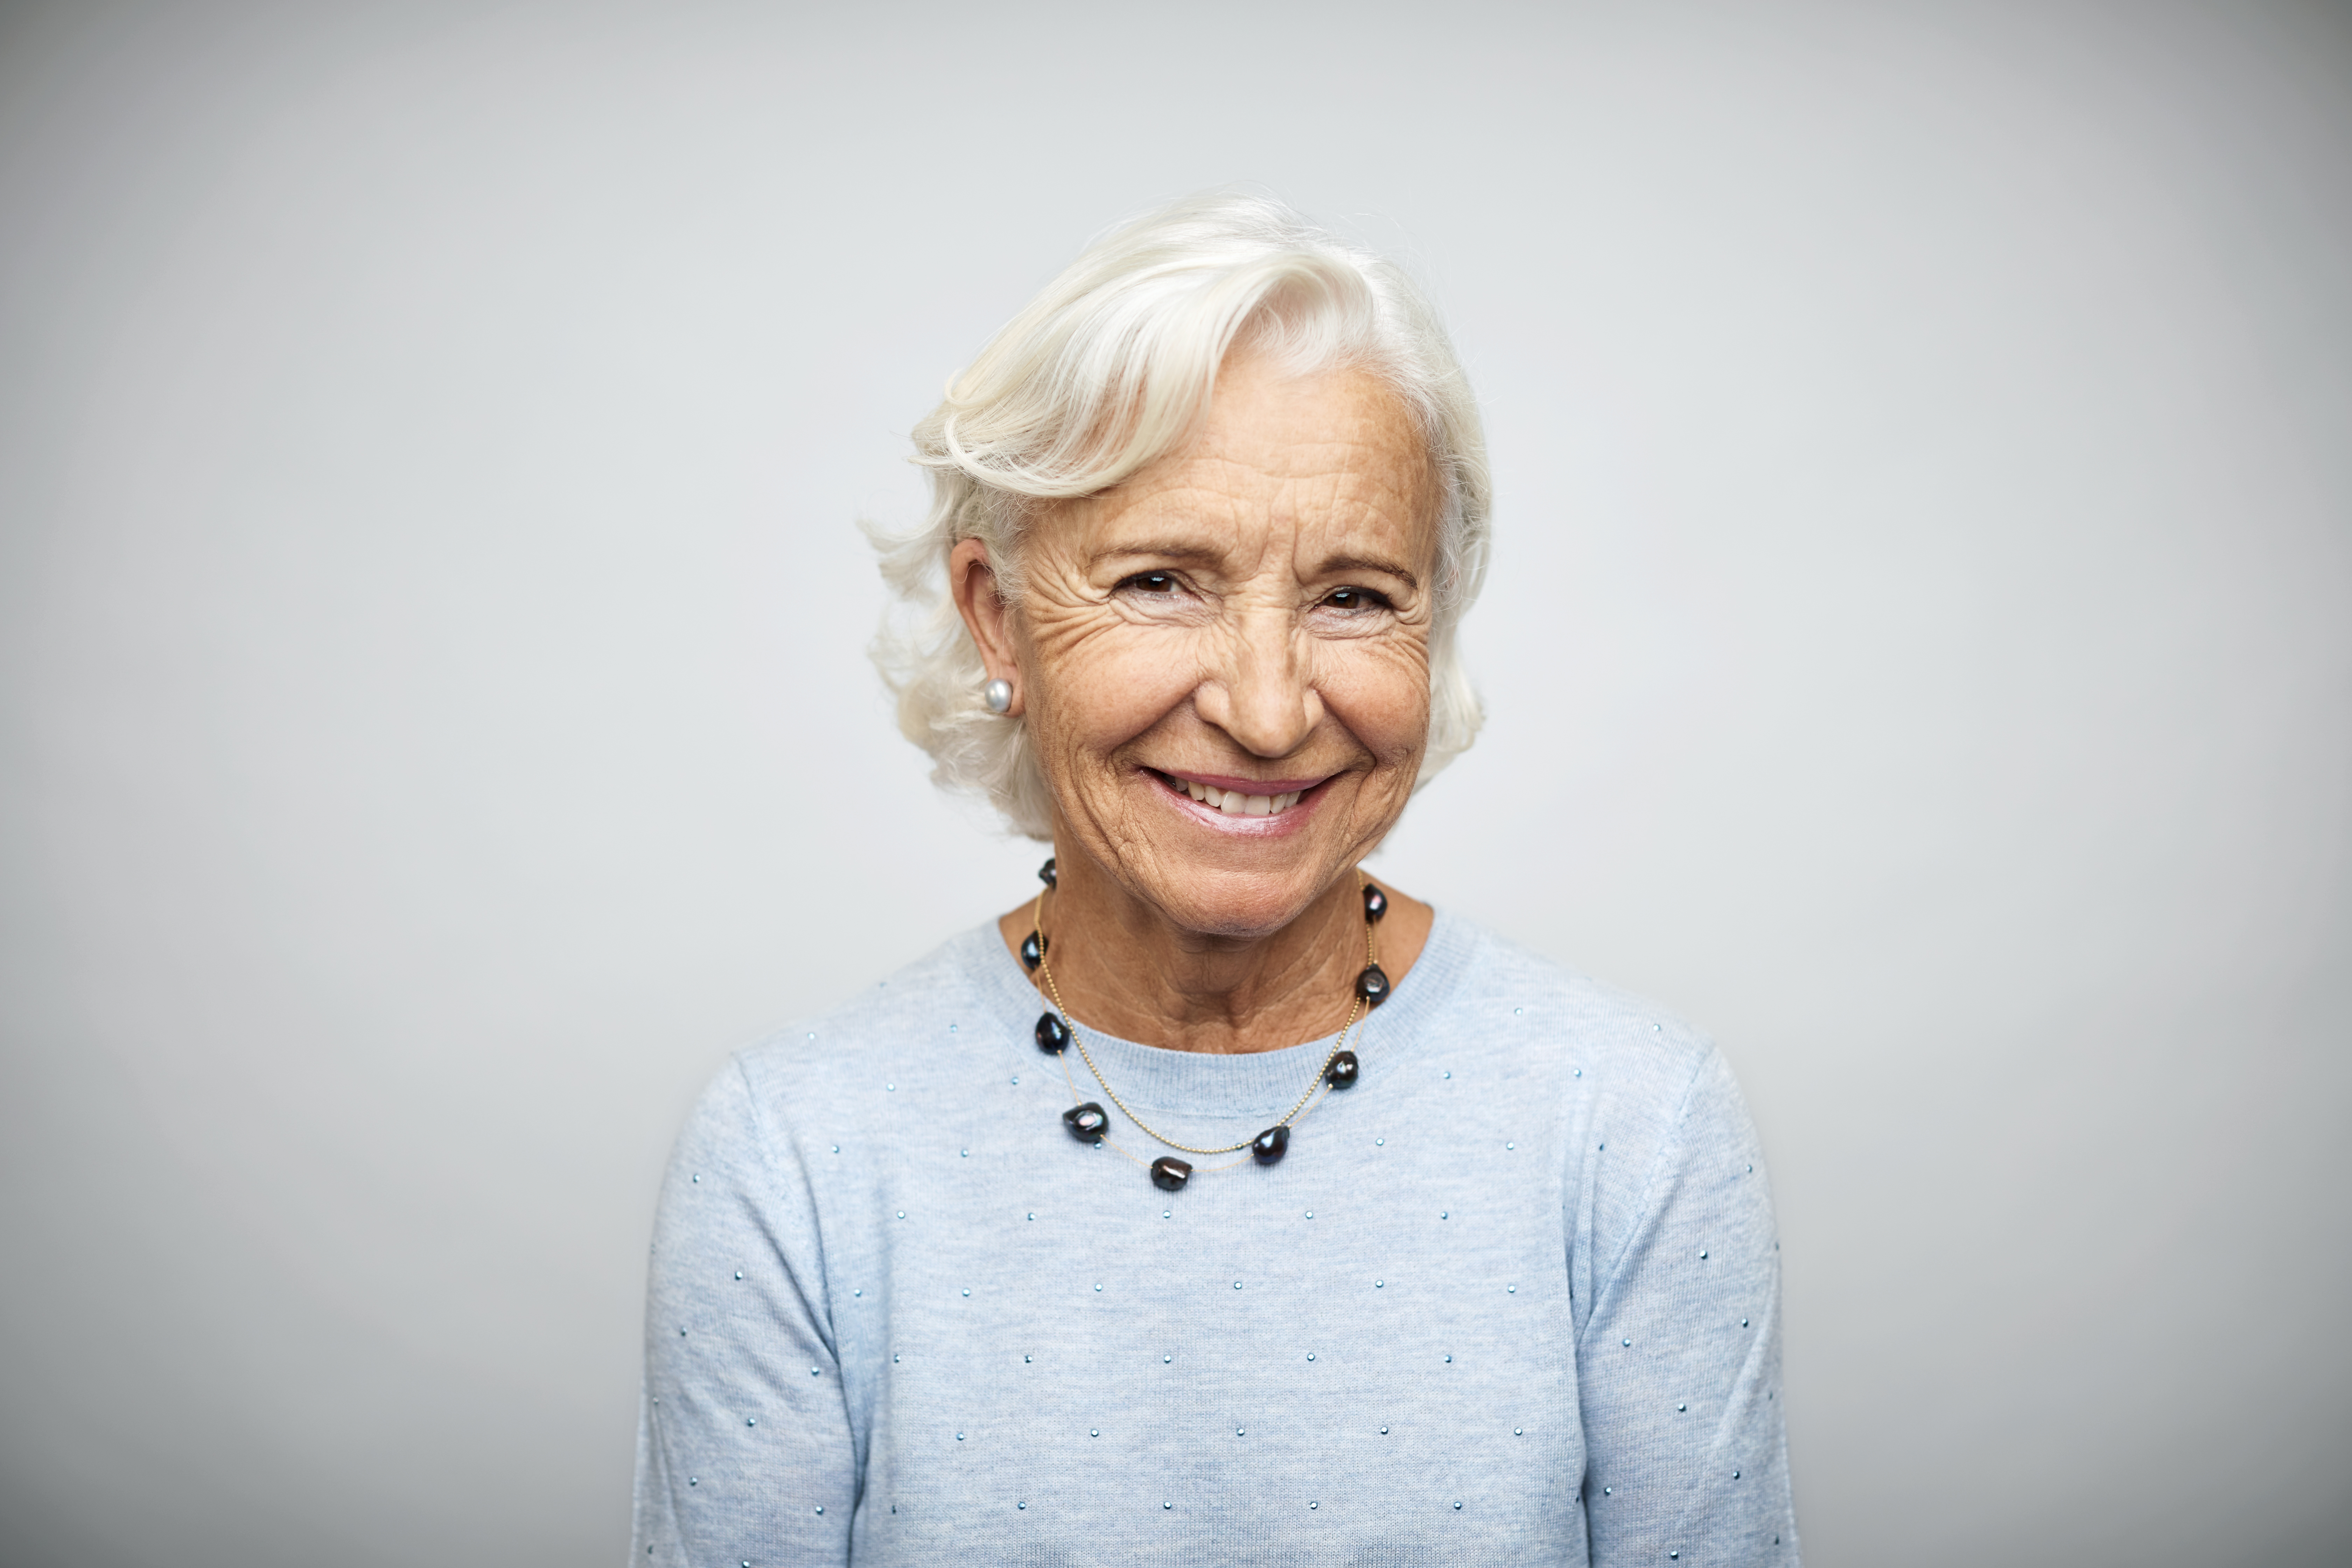 Elderly businesswoman smiling on white background | Source: Getty Images